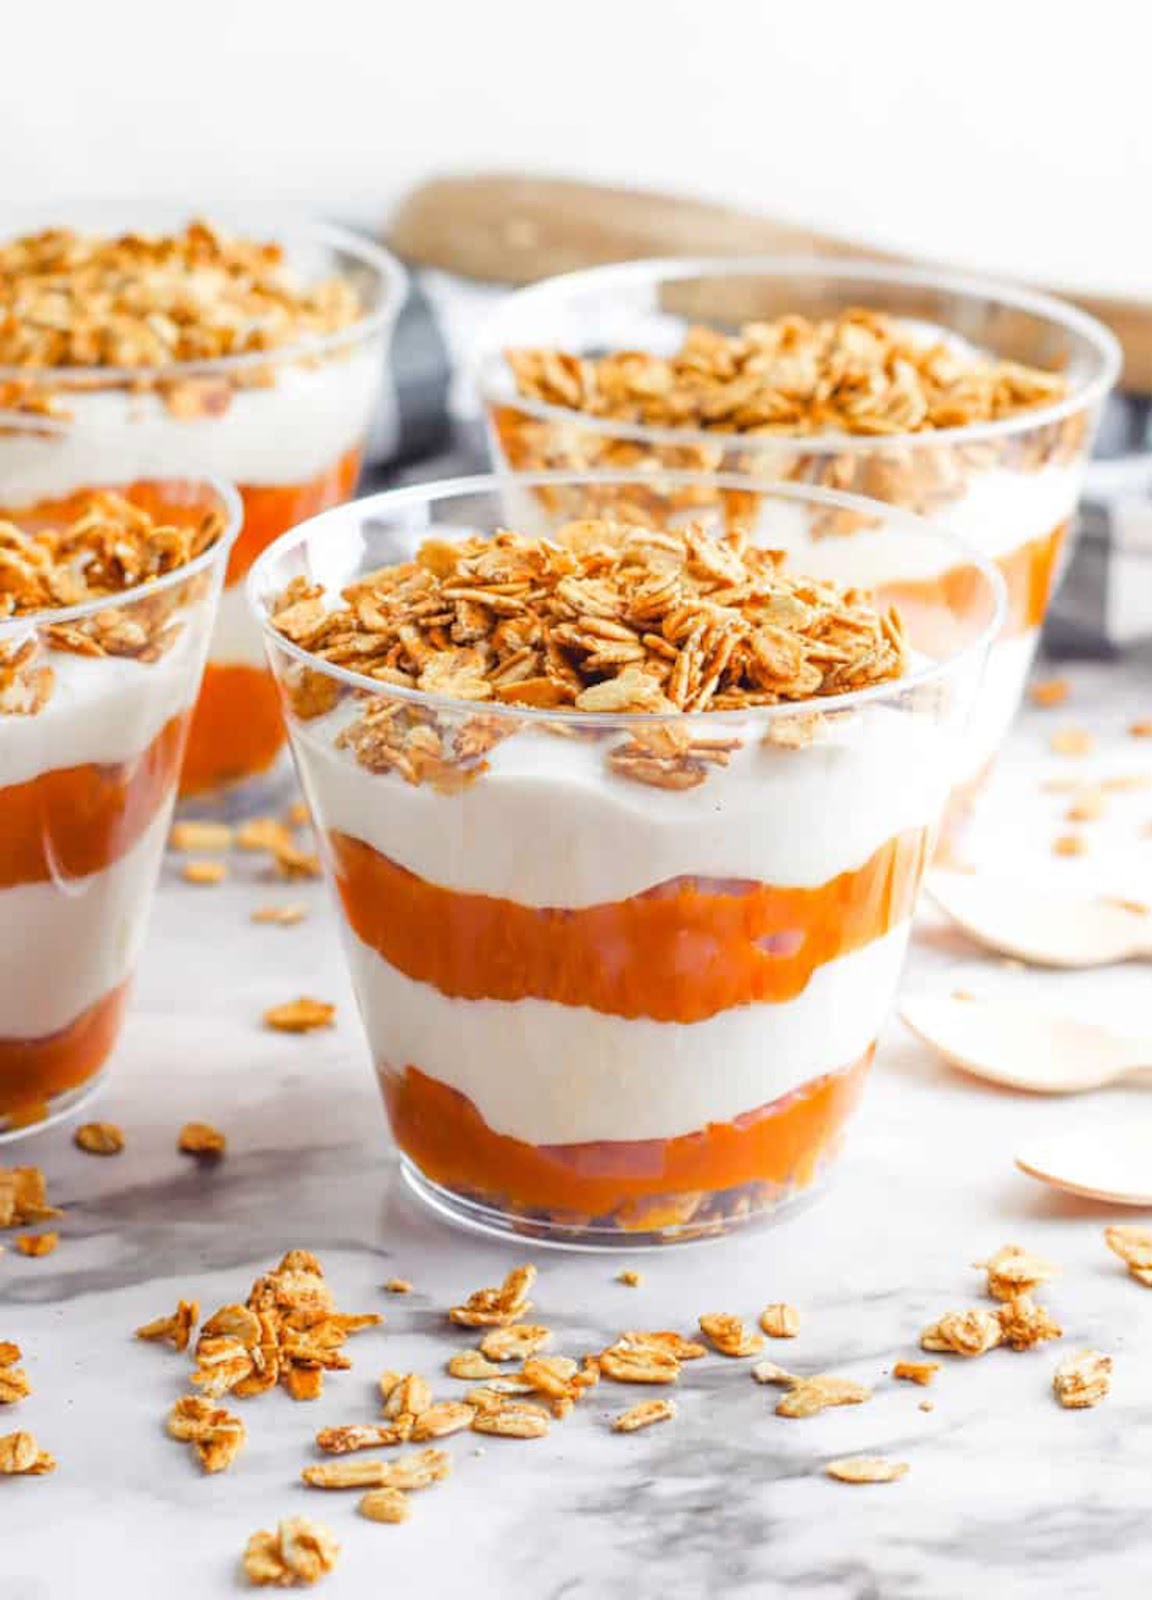 Pumpkin parfaits with spiced granola served in glass cups.